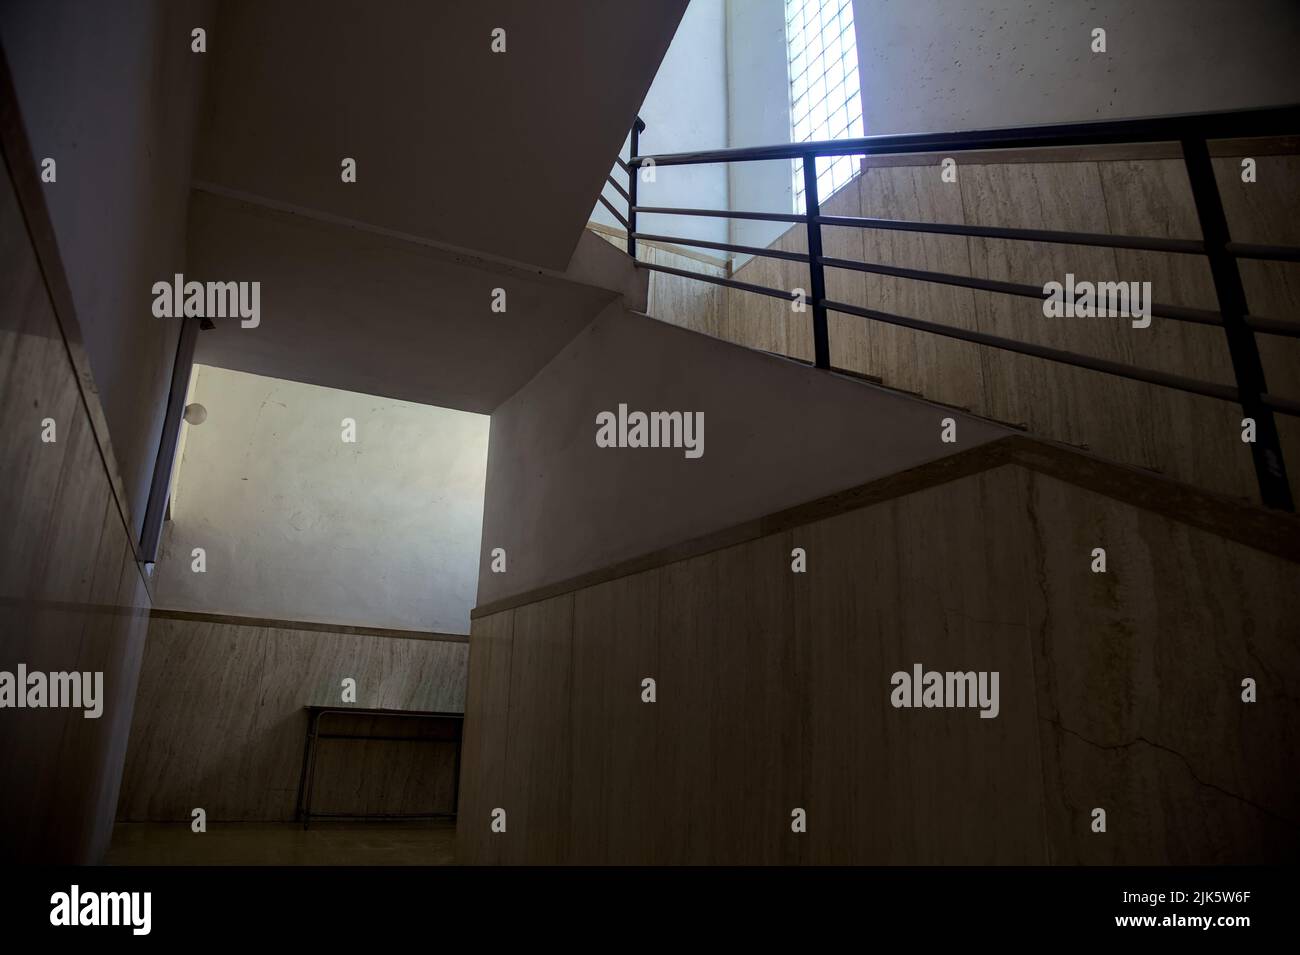 Staircase lit by a feeble light coming from a window Stock Photo